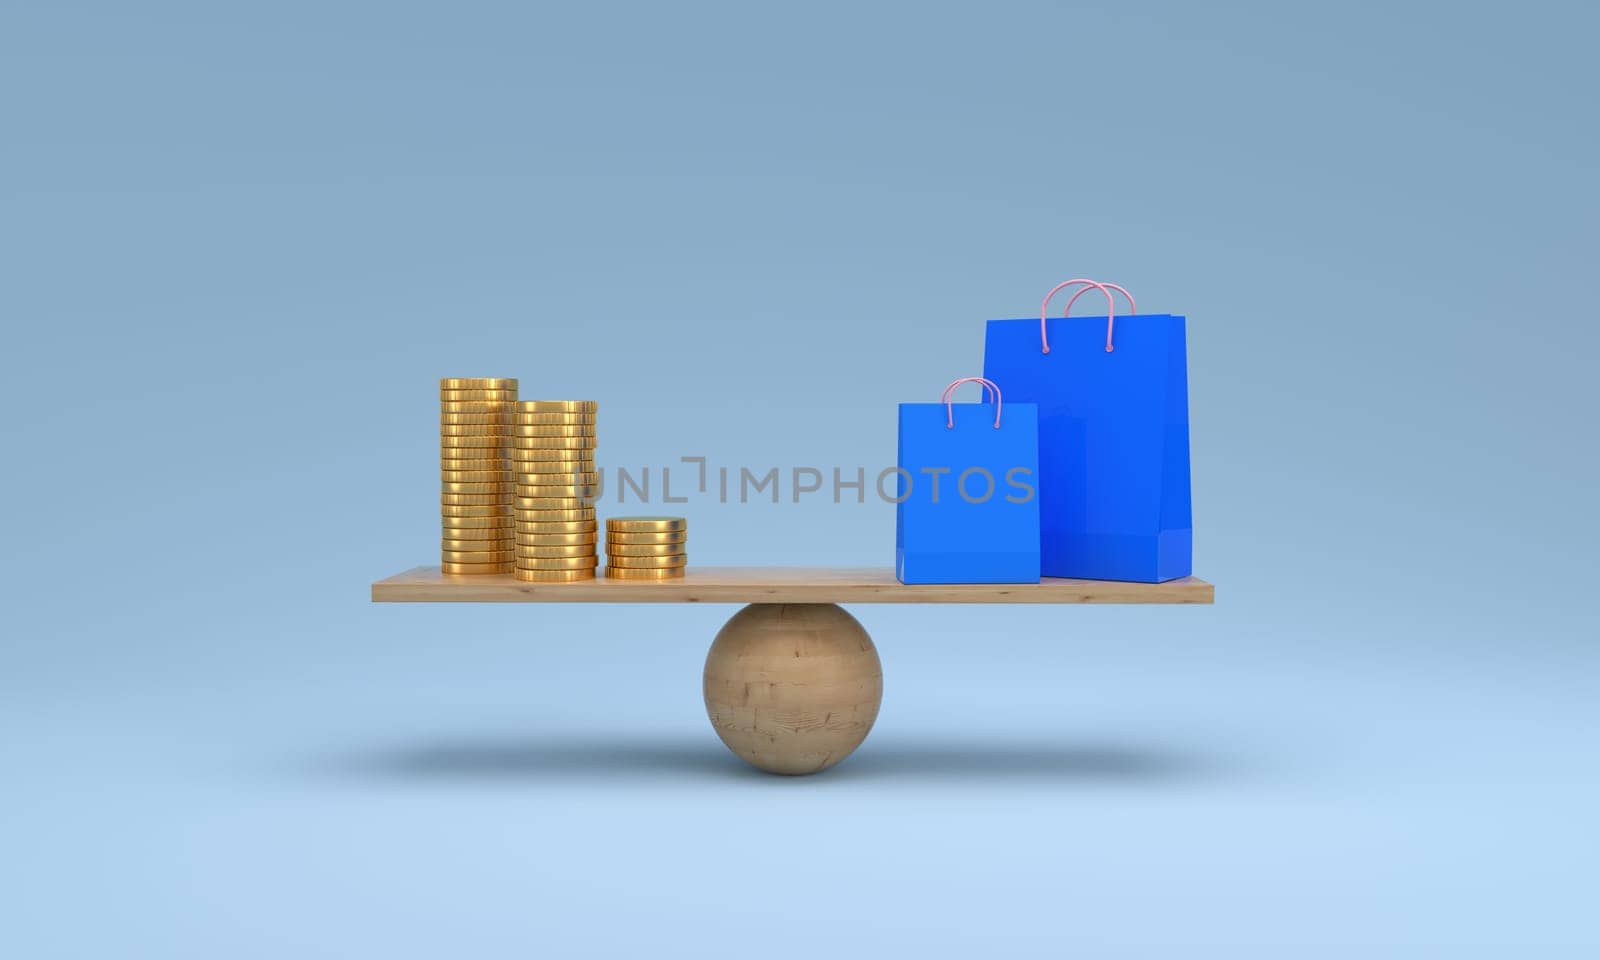 Wood scale with coins stacks and shopping bag. Weight, comparison, money safe, exchange, idea, management and investing concept. 3D rendering.